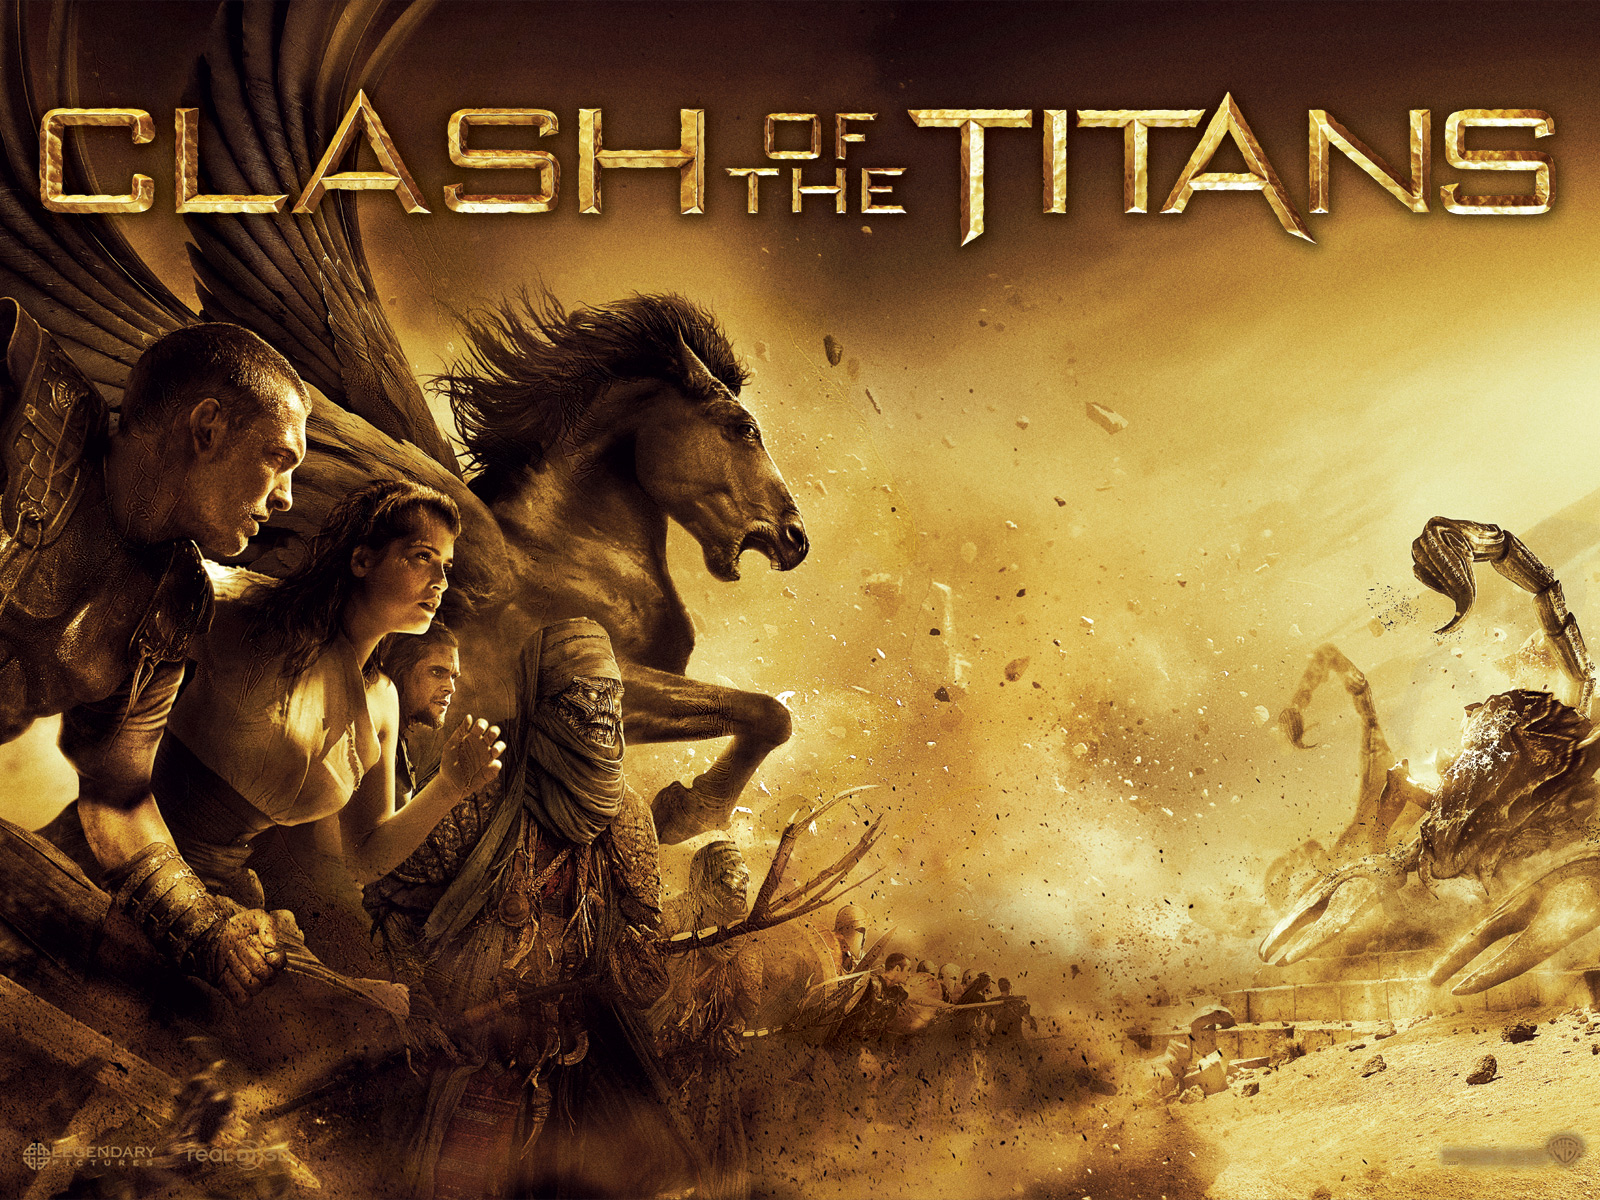 Download High quality Clash Of The Titans wallpaper / Movies / 1600x1200